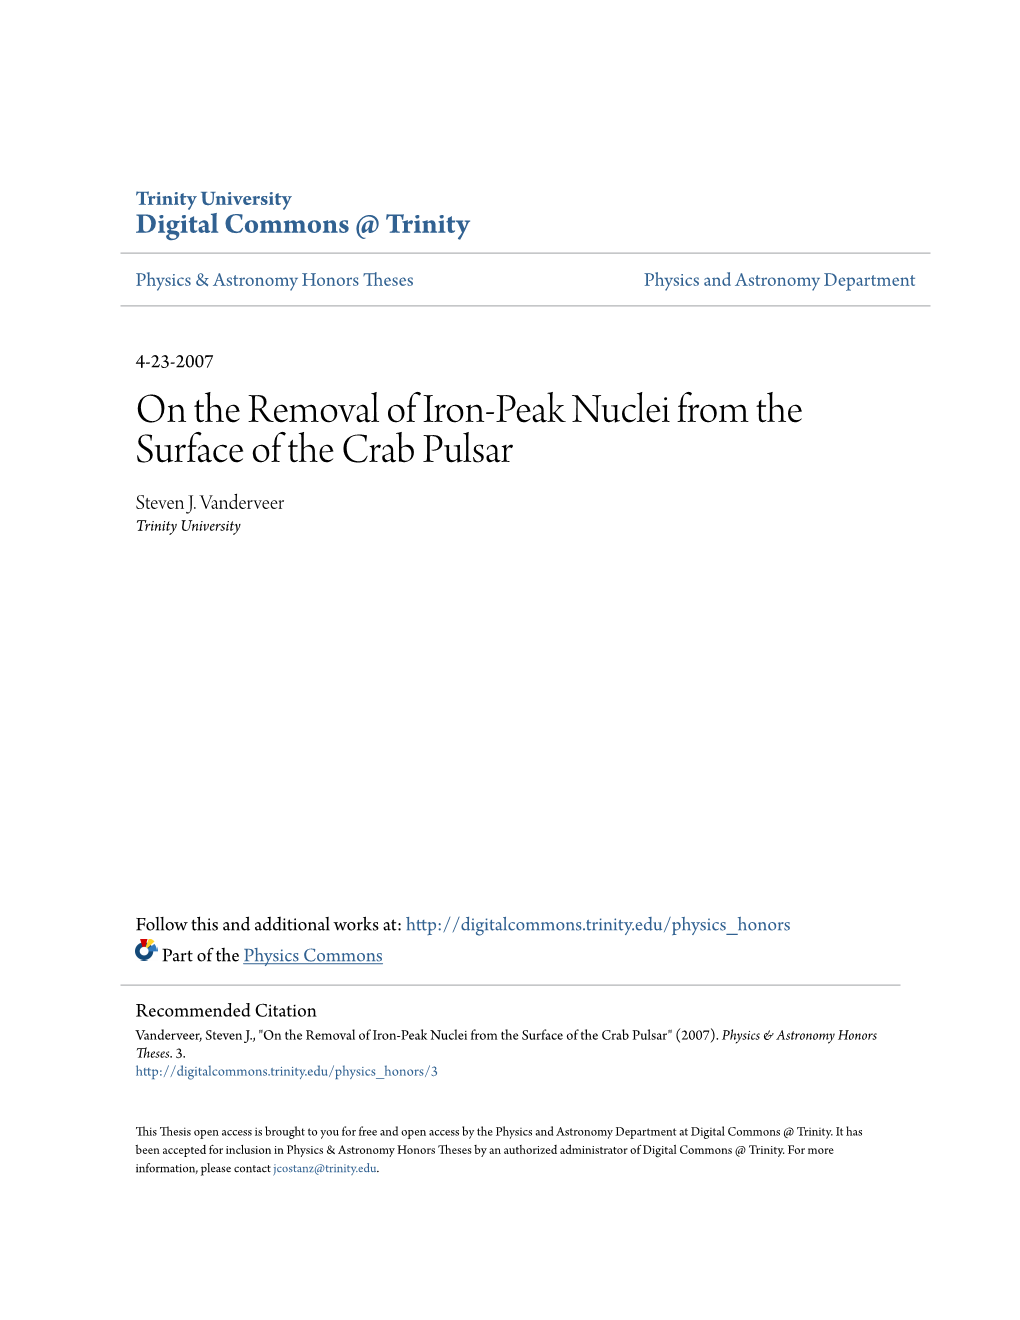 On the Removal of Iron-Peak Nuclei from the Surface of the Crab Pulsar Steven J